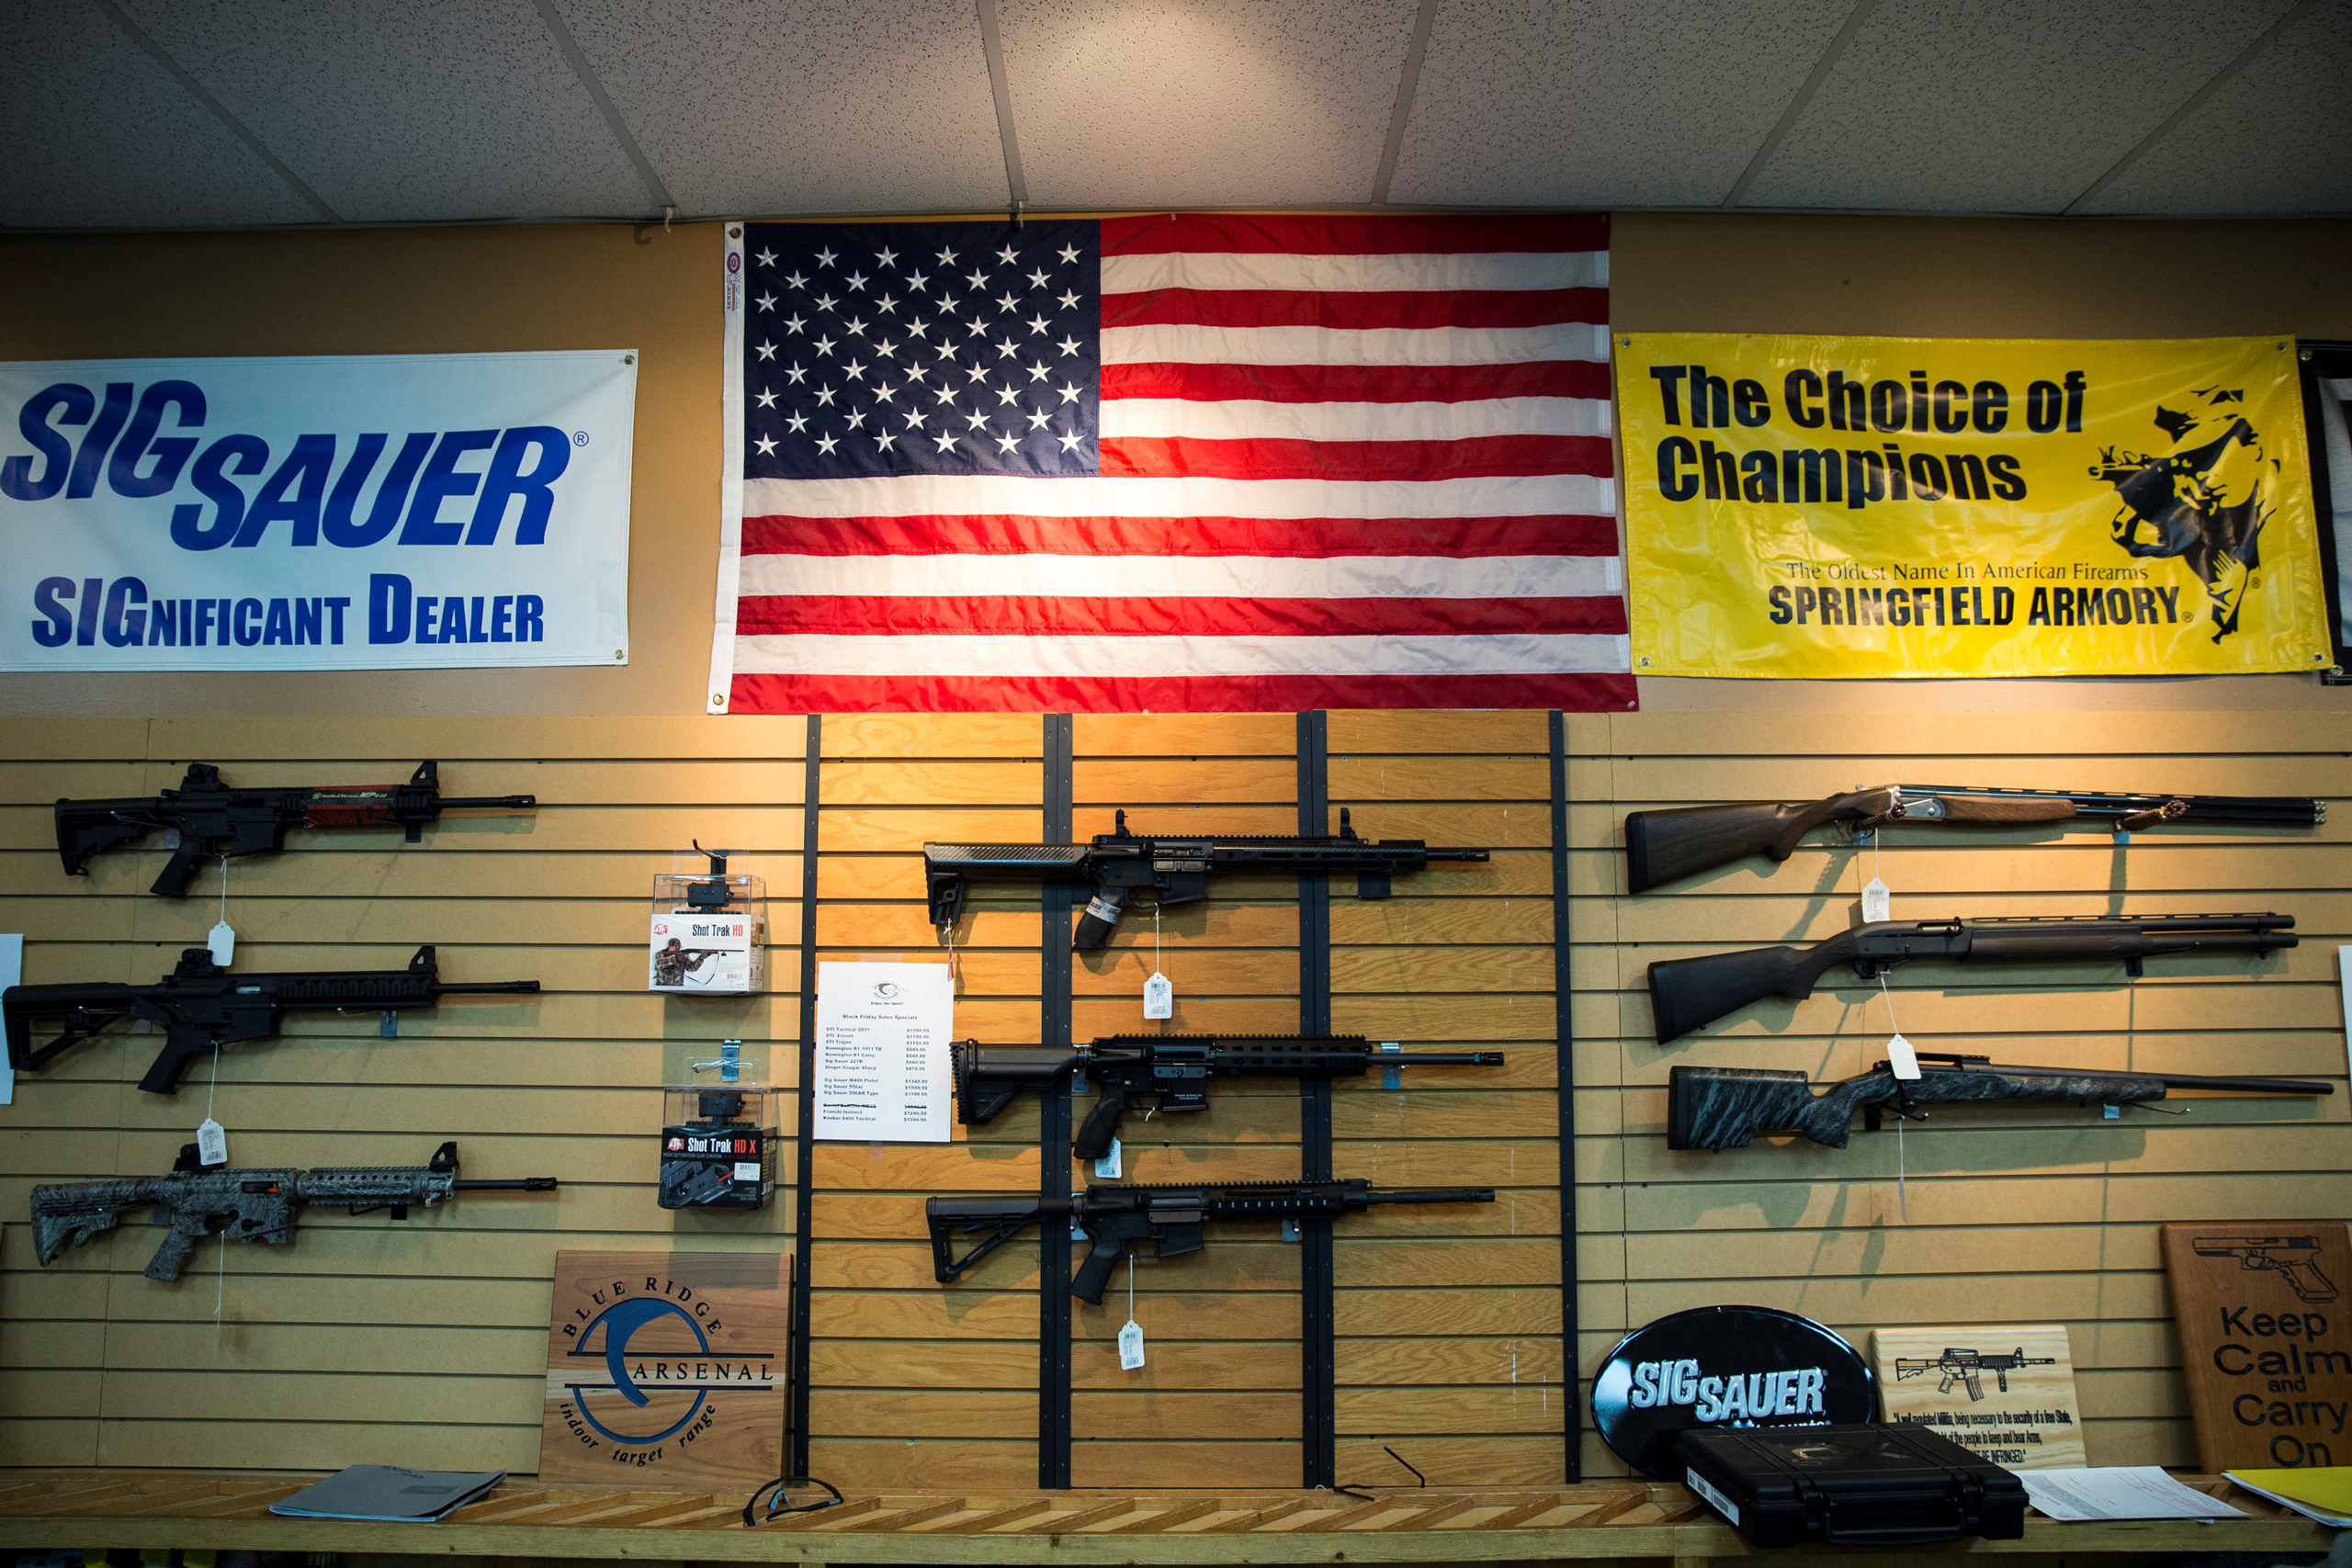 AR-15 style rifles and shotguns for sale at Blue Ridge Arsenal in Chantilly, Va., USA on Jan. 9, 2015. (Samuel Corum—Anadolu Agency/Getty Images)